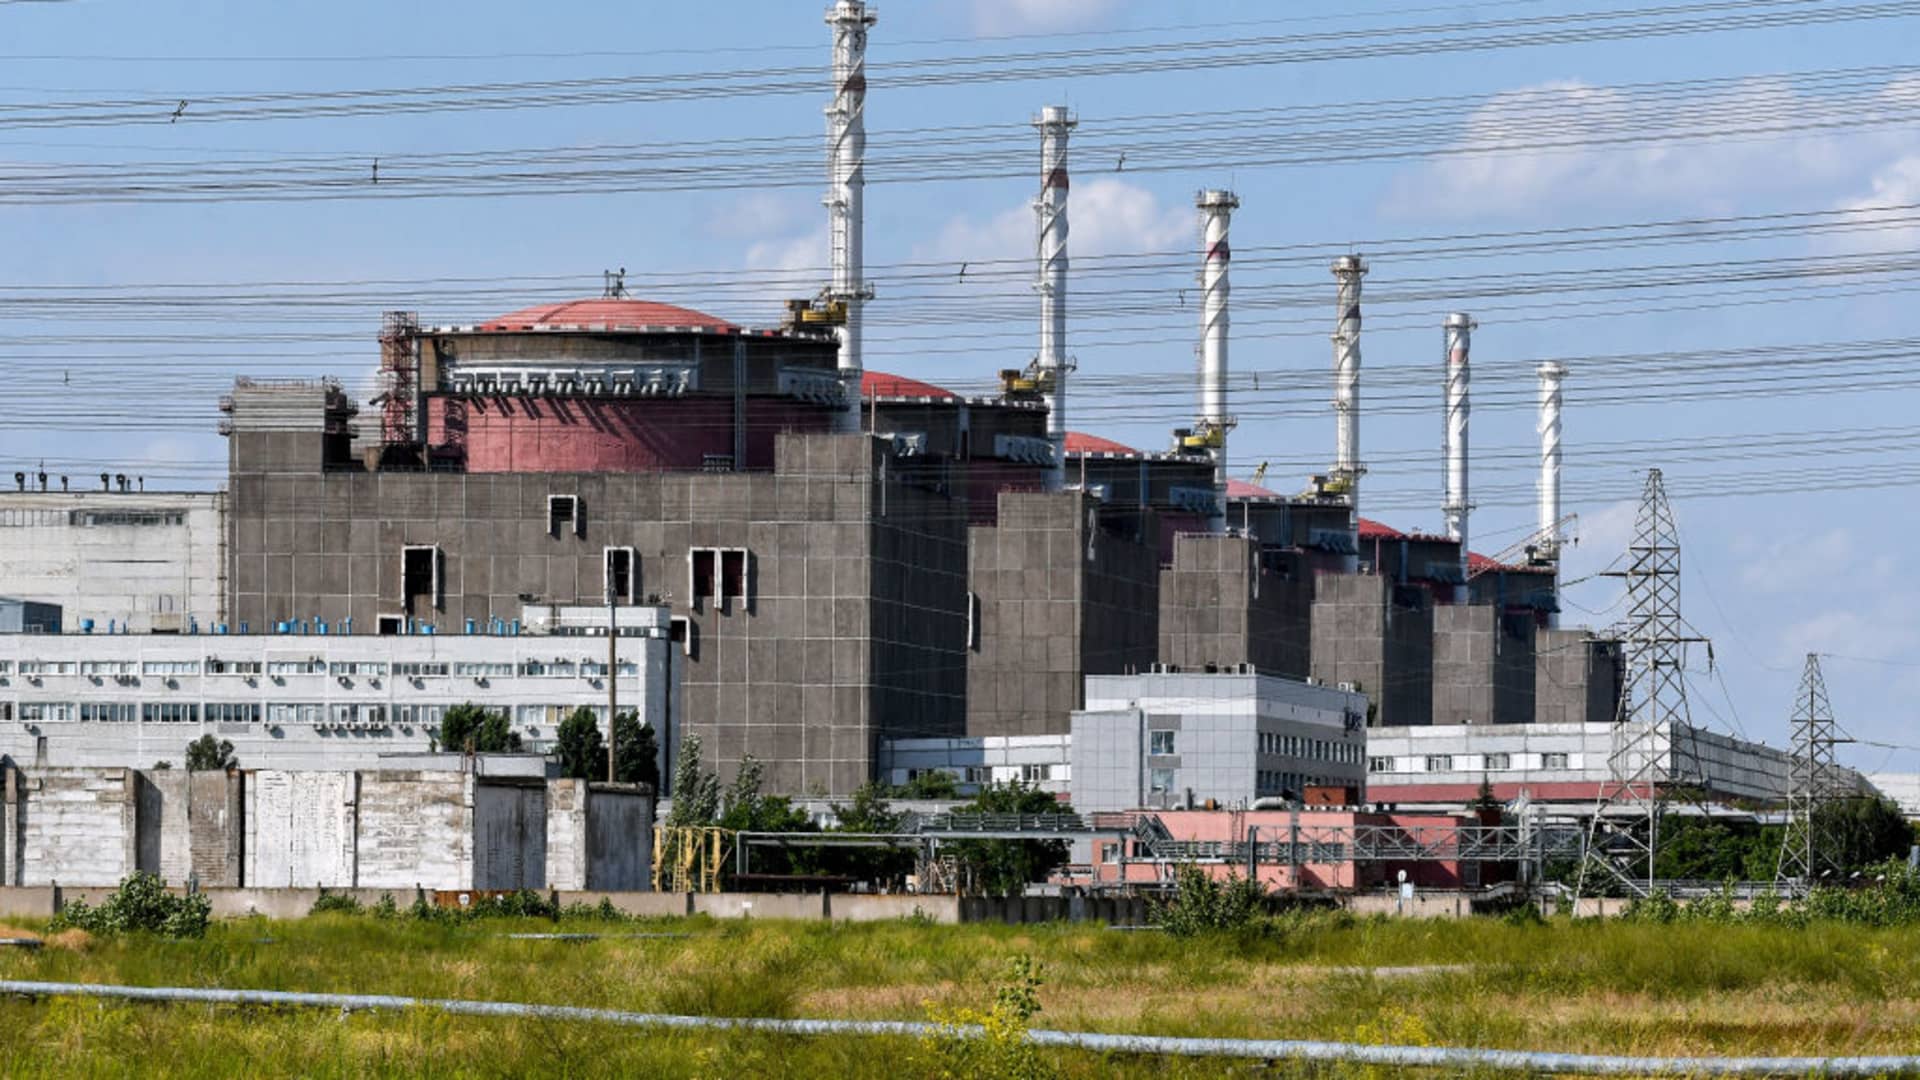 Six power units generate 40-42 billion kWh of electricity making the Zaporizhzhia Nuclear Power Plant the largest nuclear power plant not only in Ukraine, but also in Europe, Enerhodar, Zaporizhzhia Region, southeastern Ukraine, July 9, 2019. Ukrinform.